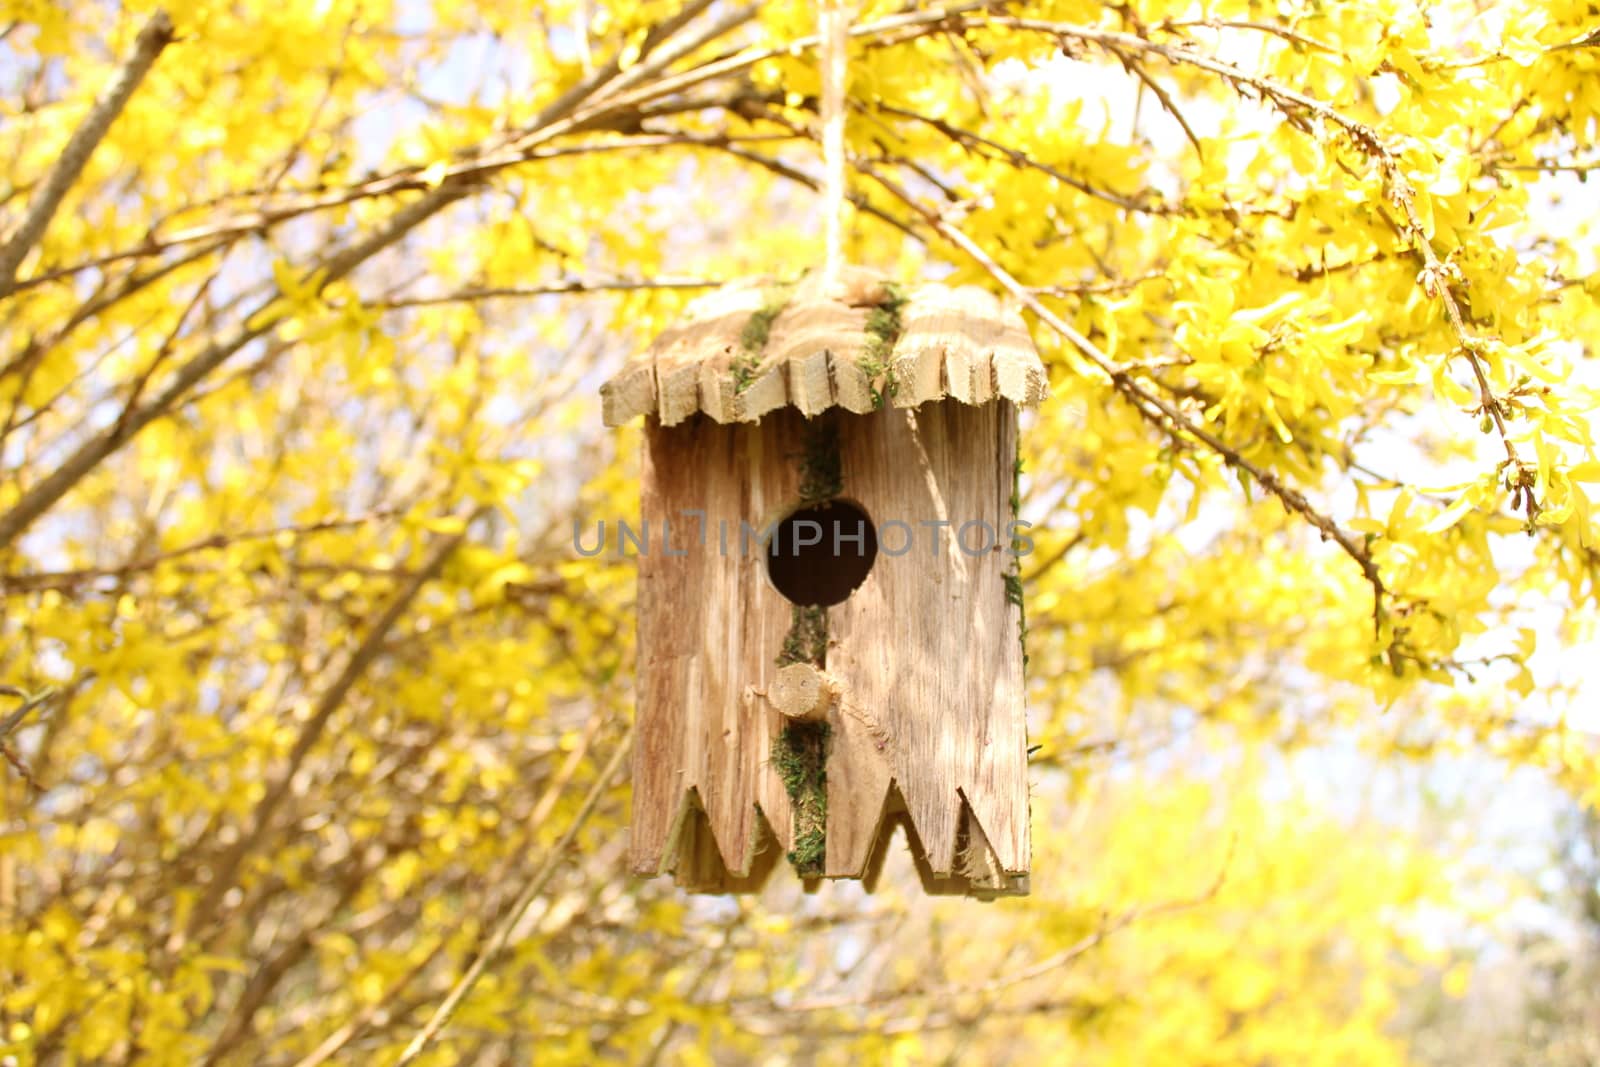 bird house in the blossoming forsythia by martina_unbehauen